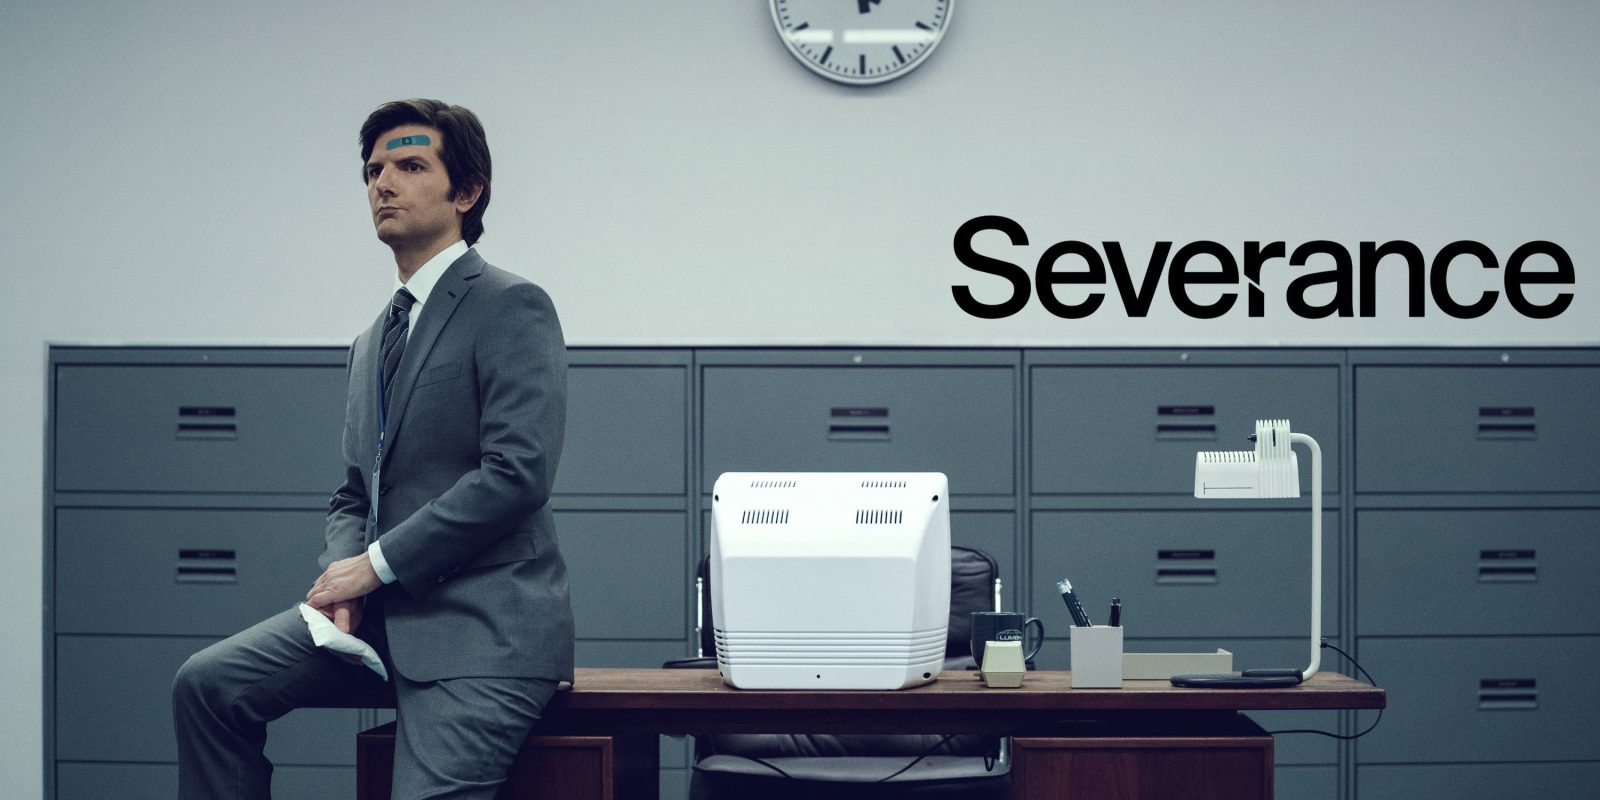 Production of apple tv show ‘severance suspended amid writers strike